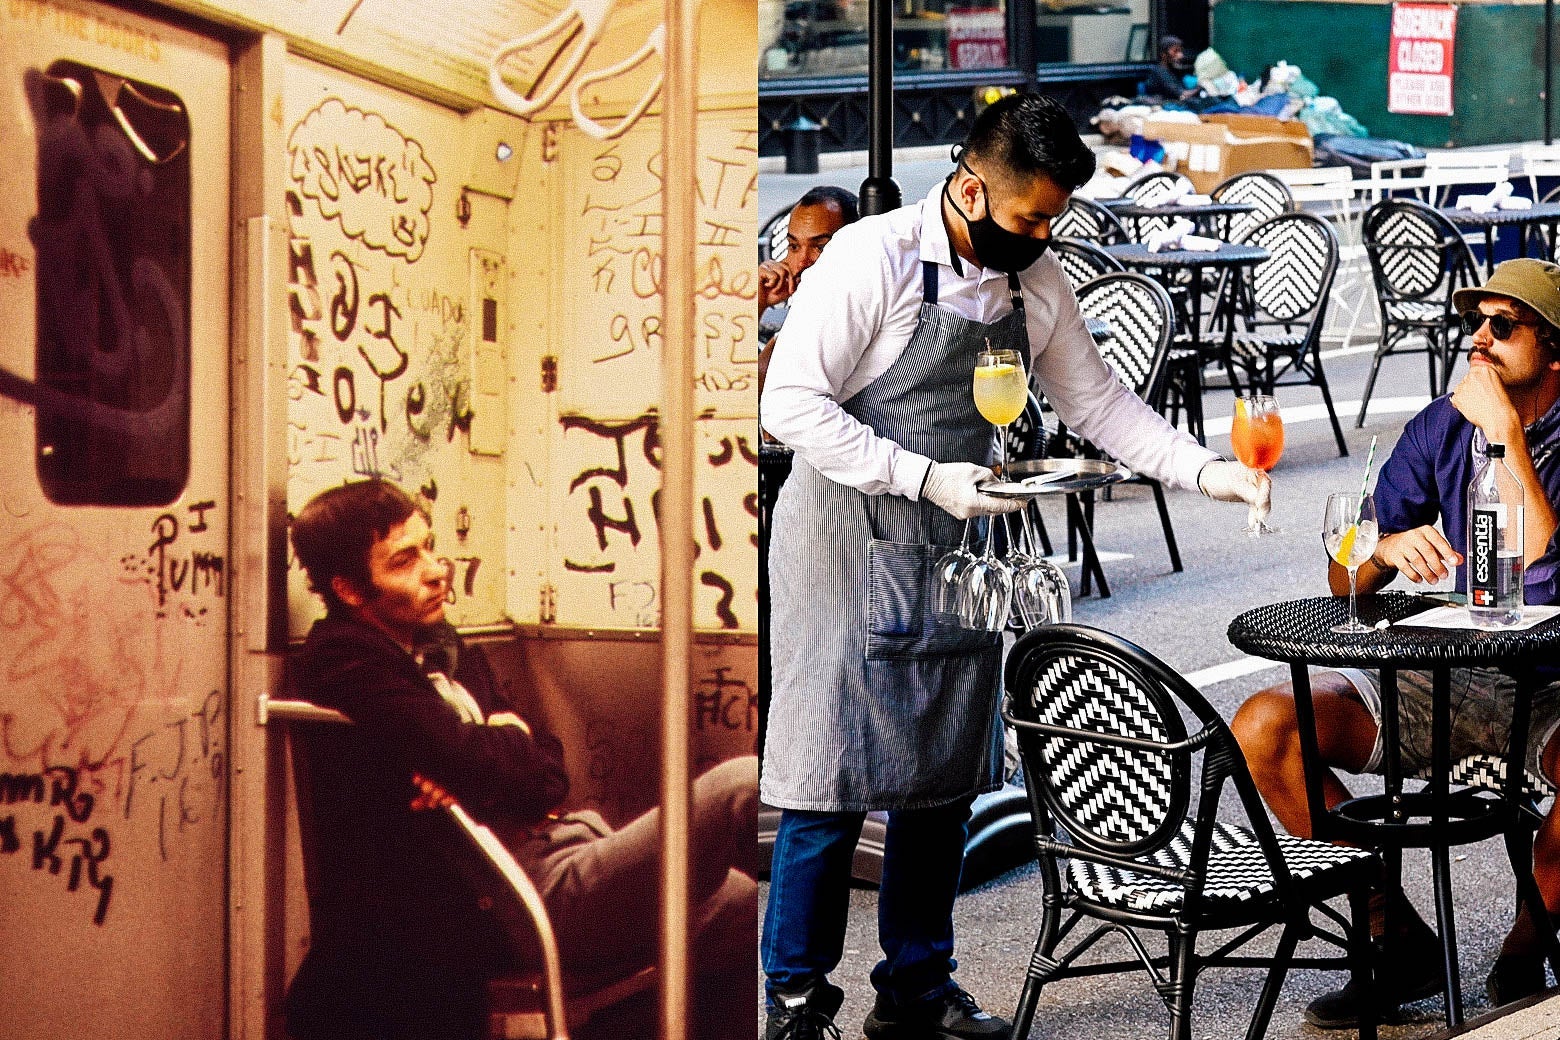 On the left, a graffitied interior of a subway car in New York City in 1973. On the right, pleasant outdoor dining in New York City now. The waiter is masked. Seems nice!